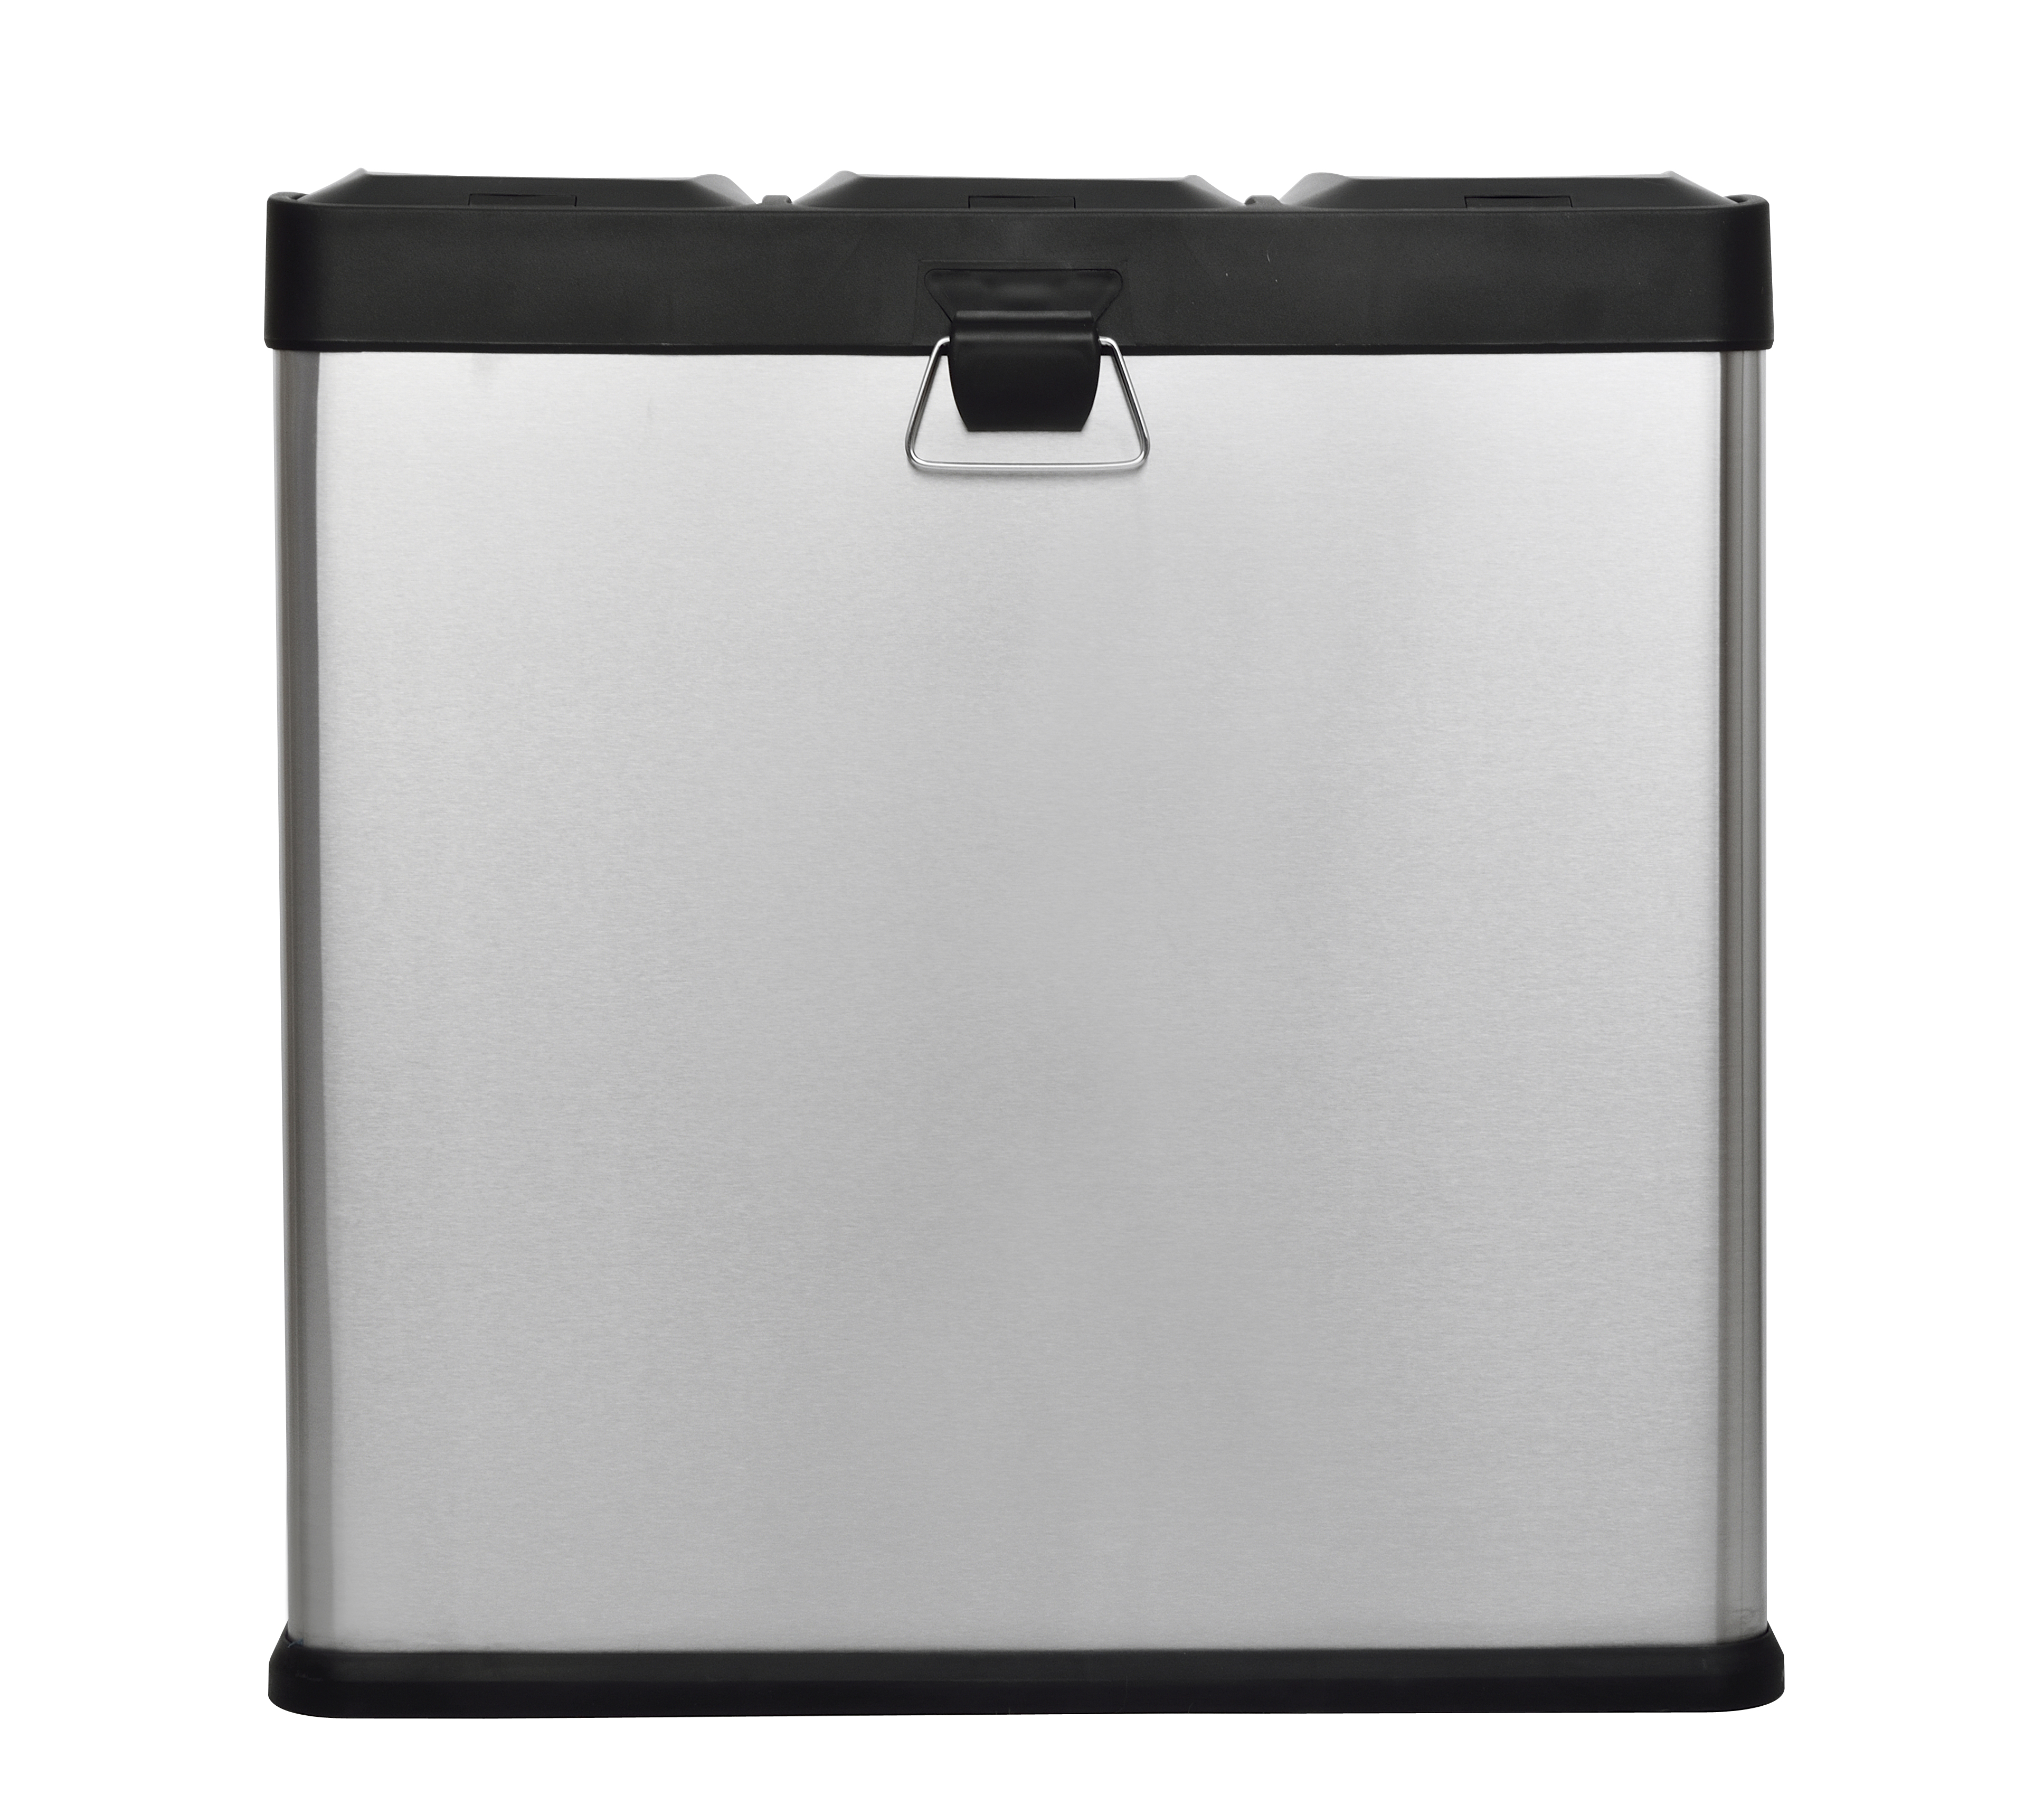 Step N' Sort 3-Compartment Stainless Steel Kitchen Trash and Recycling Bin, 16 gal - image 5 of 15